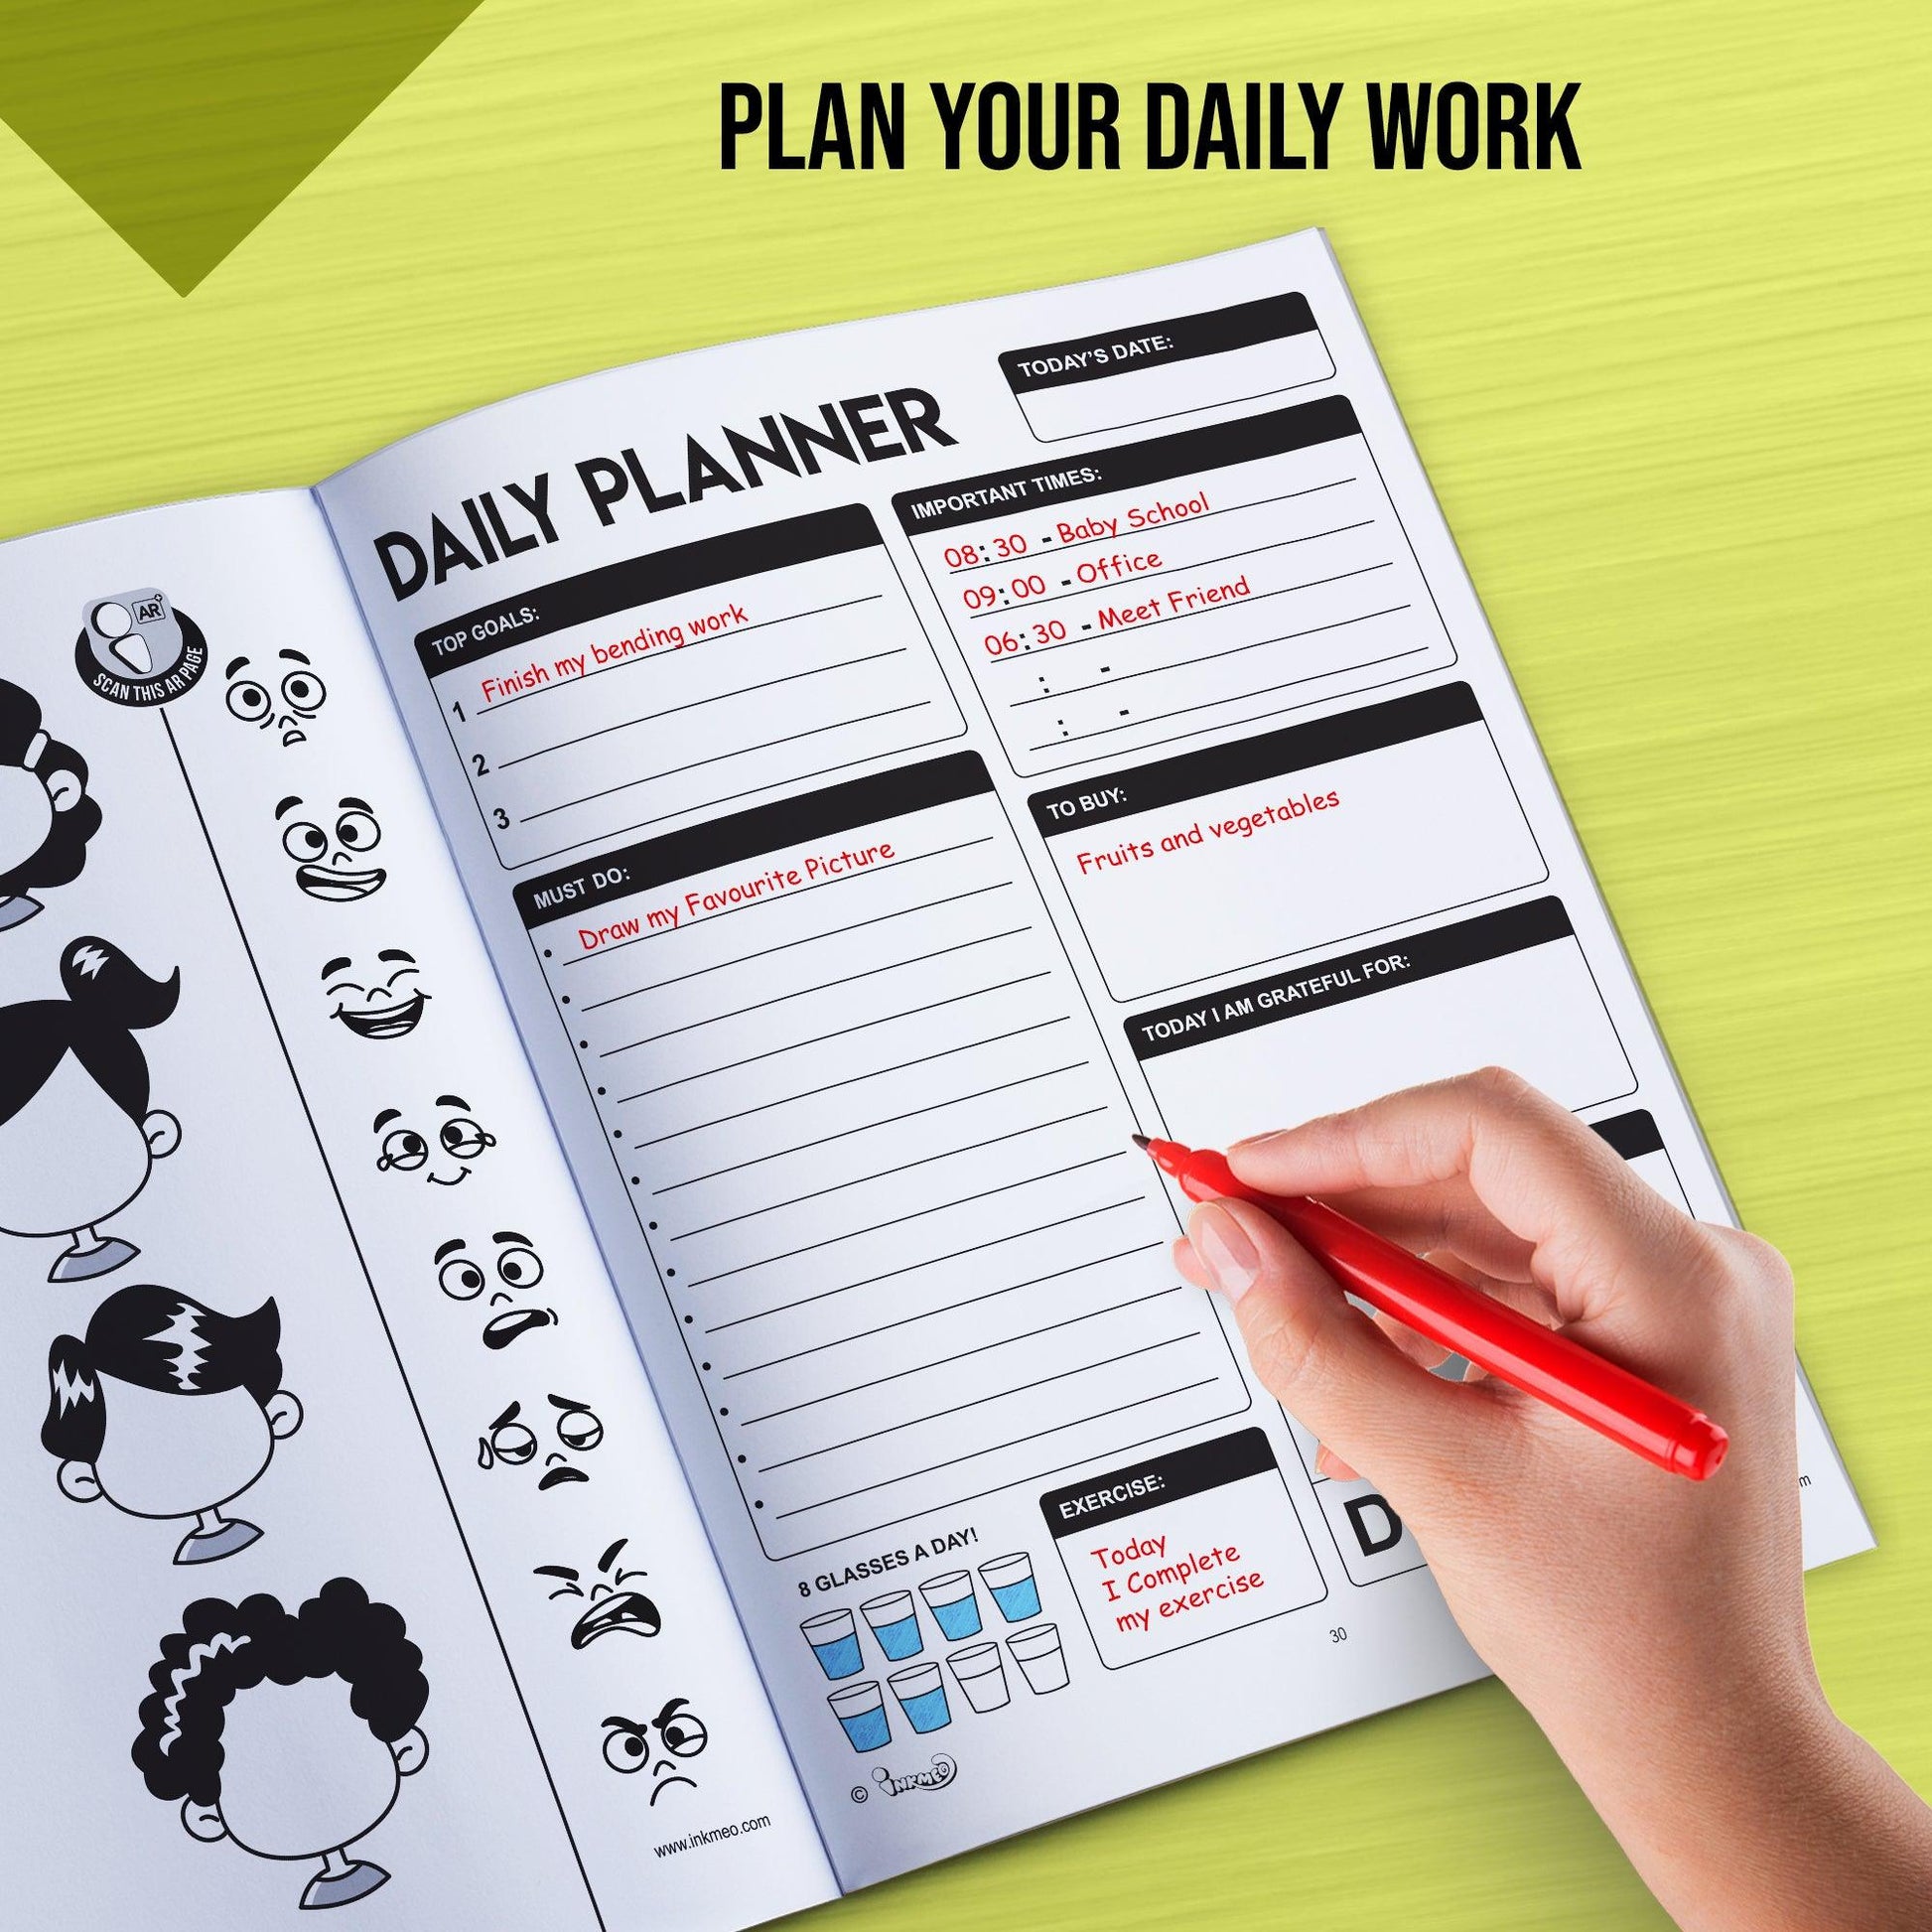 The image shows the hand working on the daily planner in this book